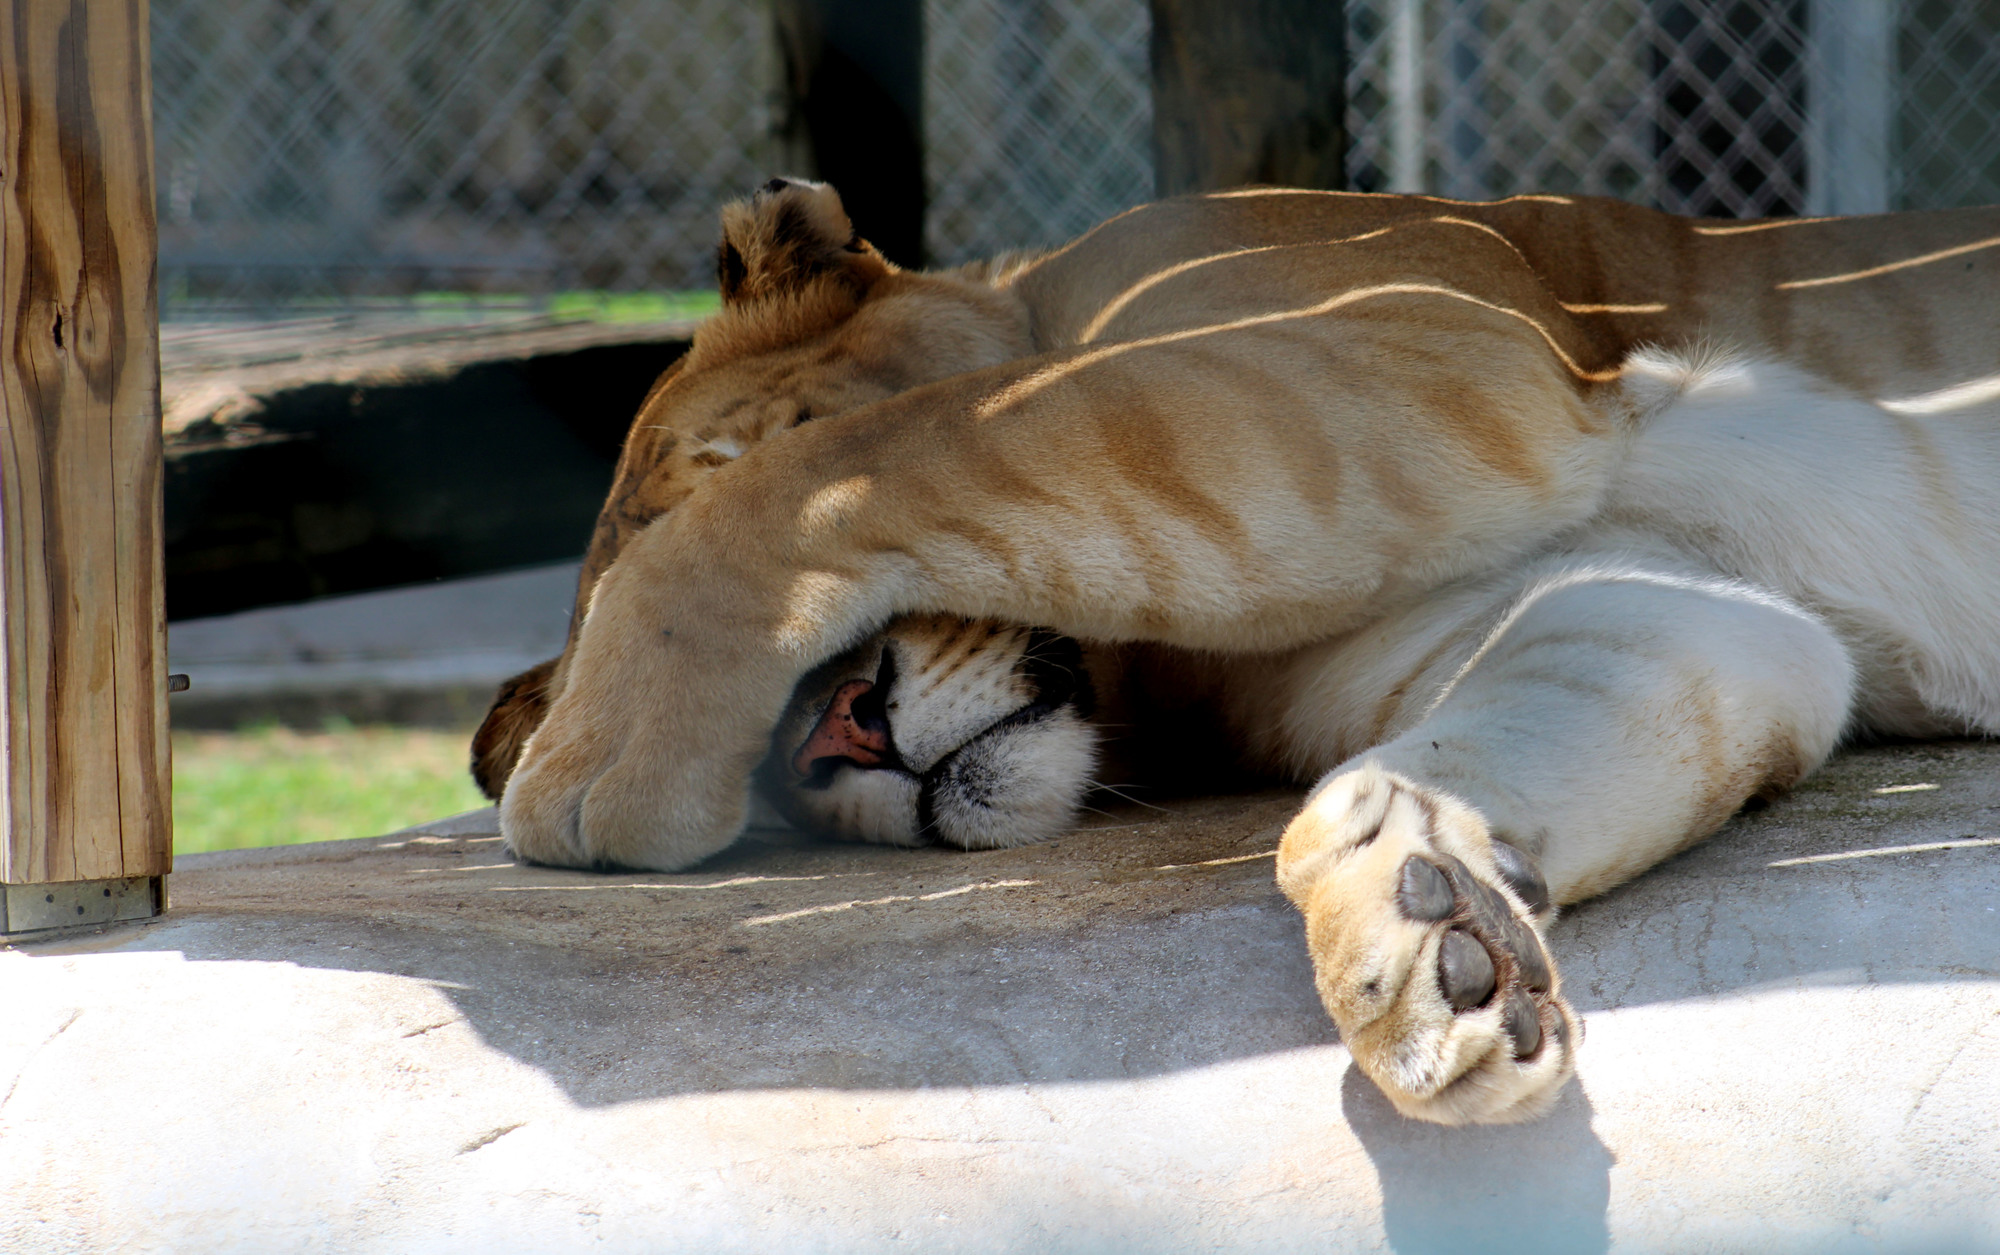 In addition to tigers, the sanctuary also features ligers and lions. 